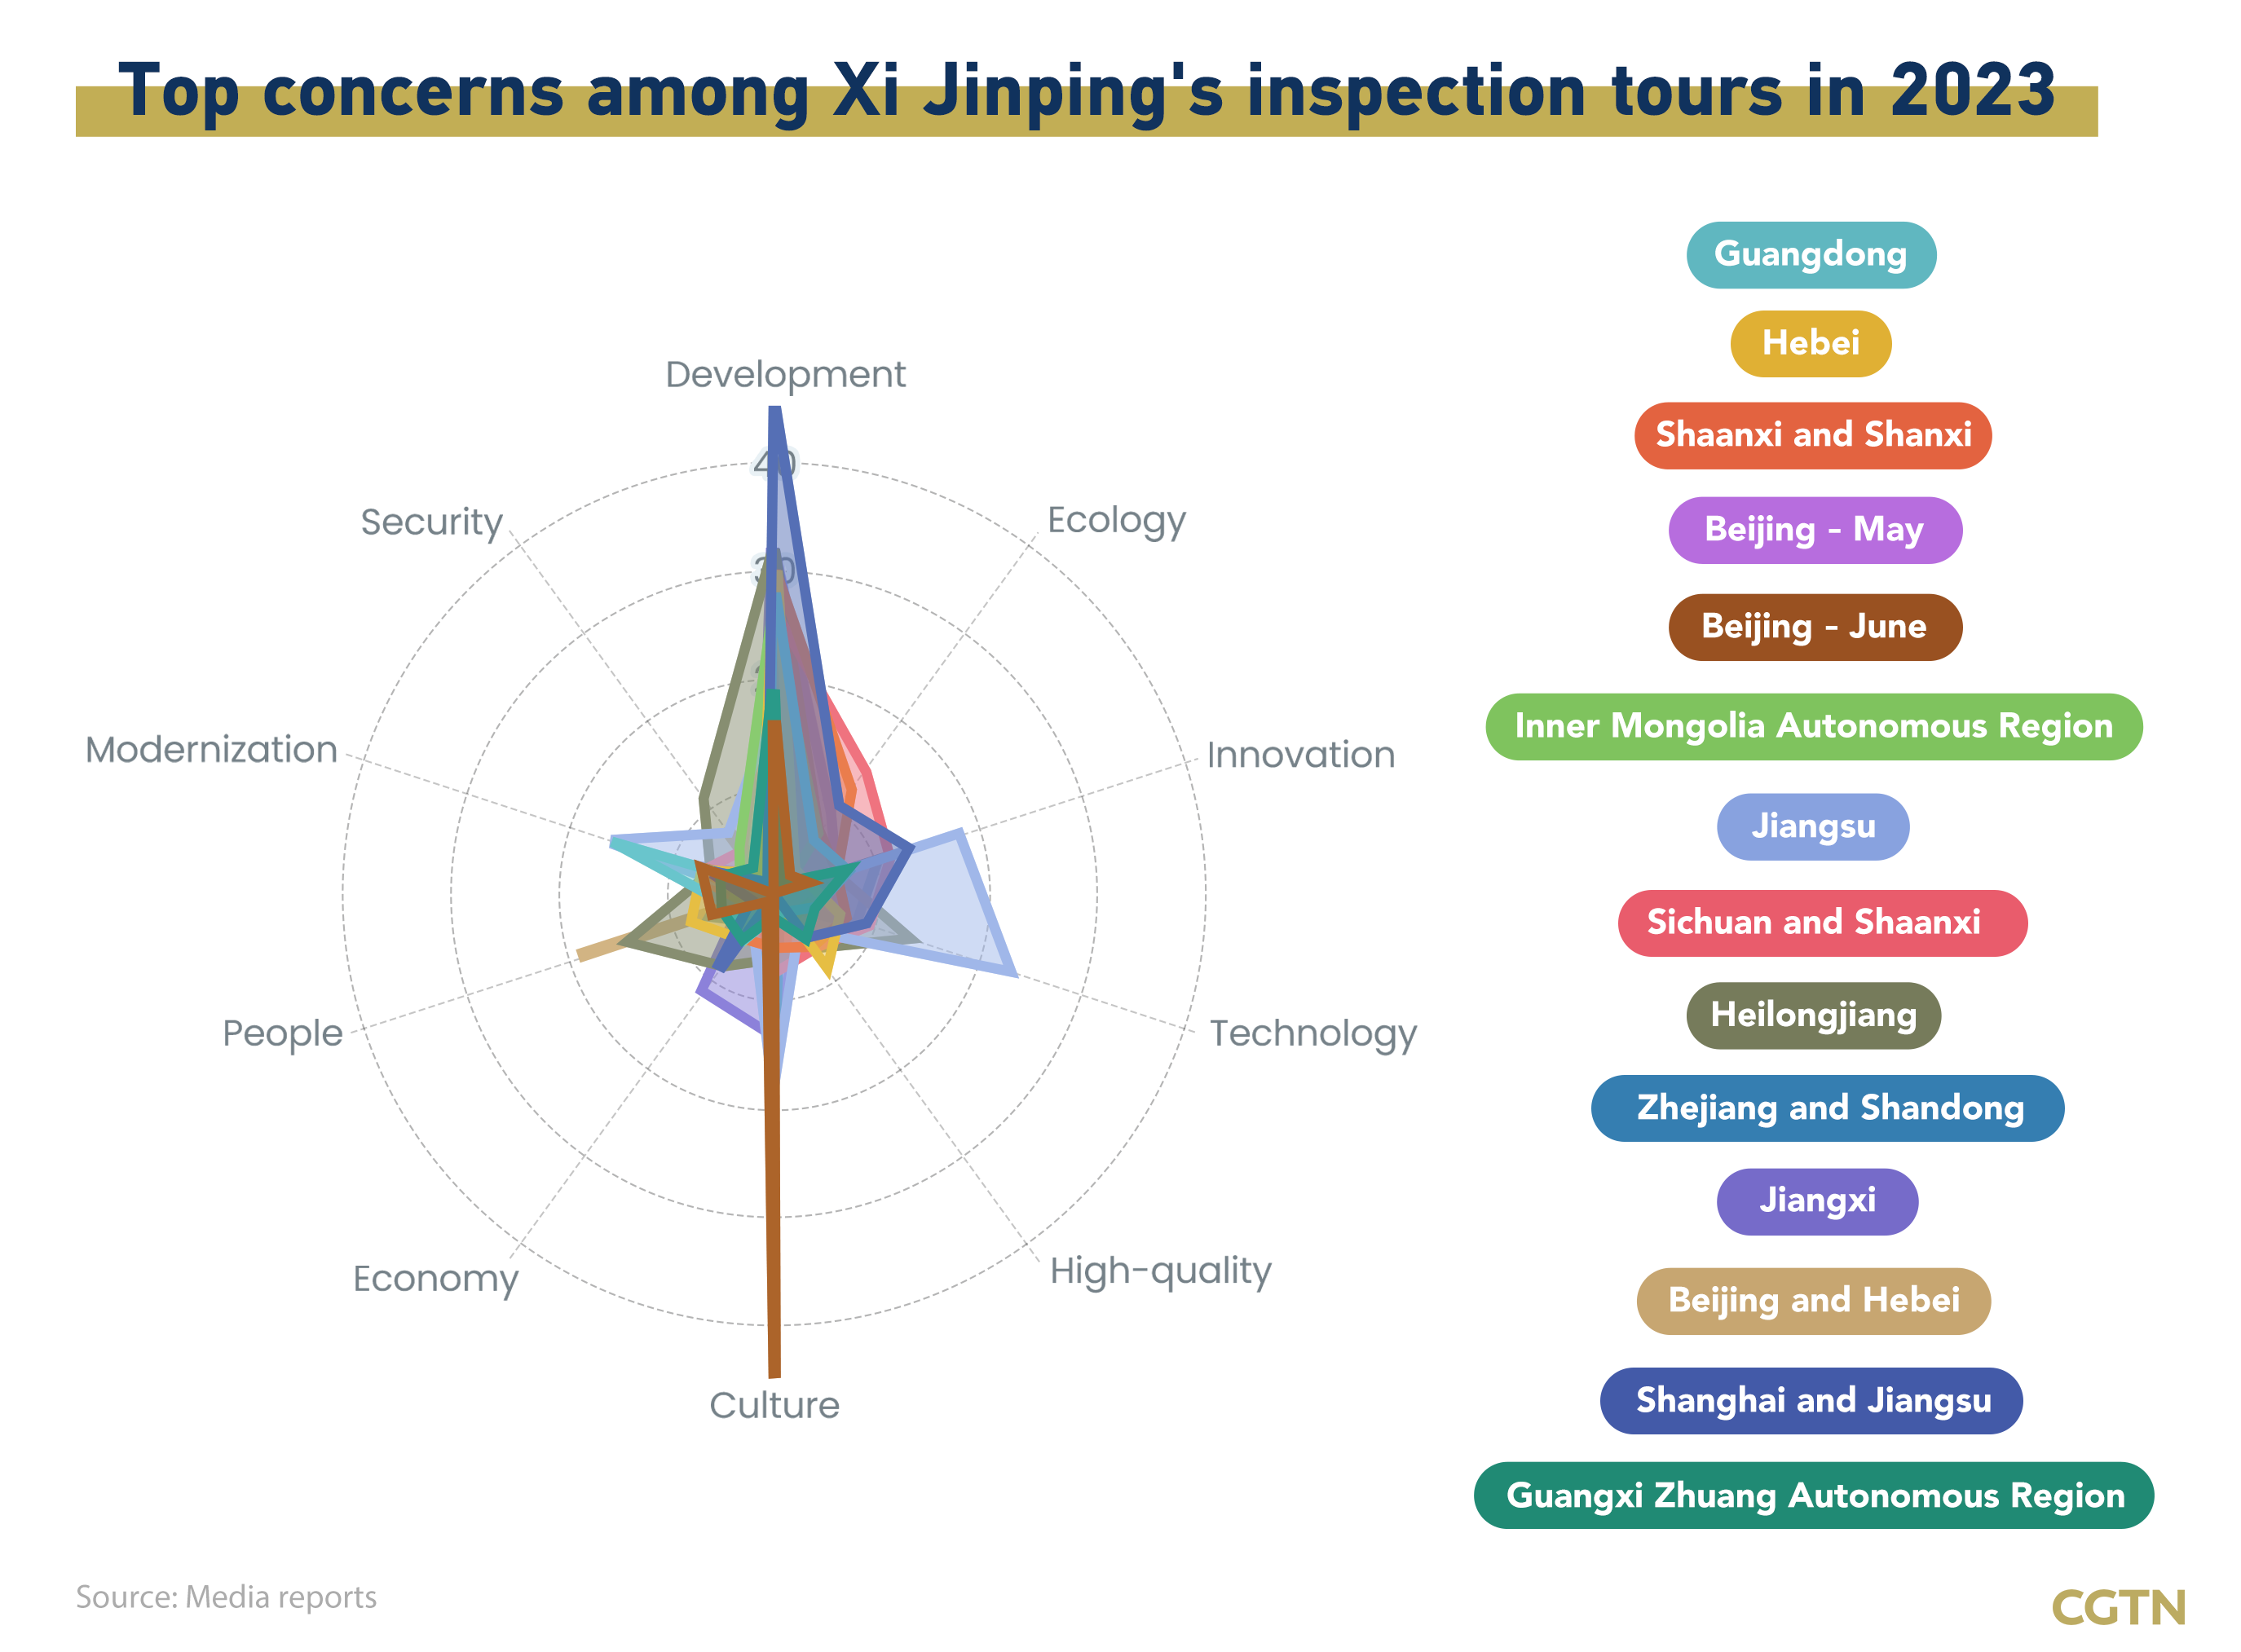 Graphics: Xi Jinping's top concerns in his tours around China in 2023